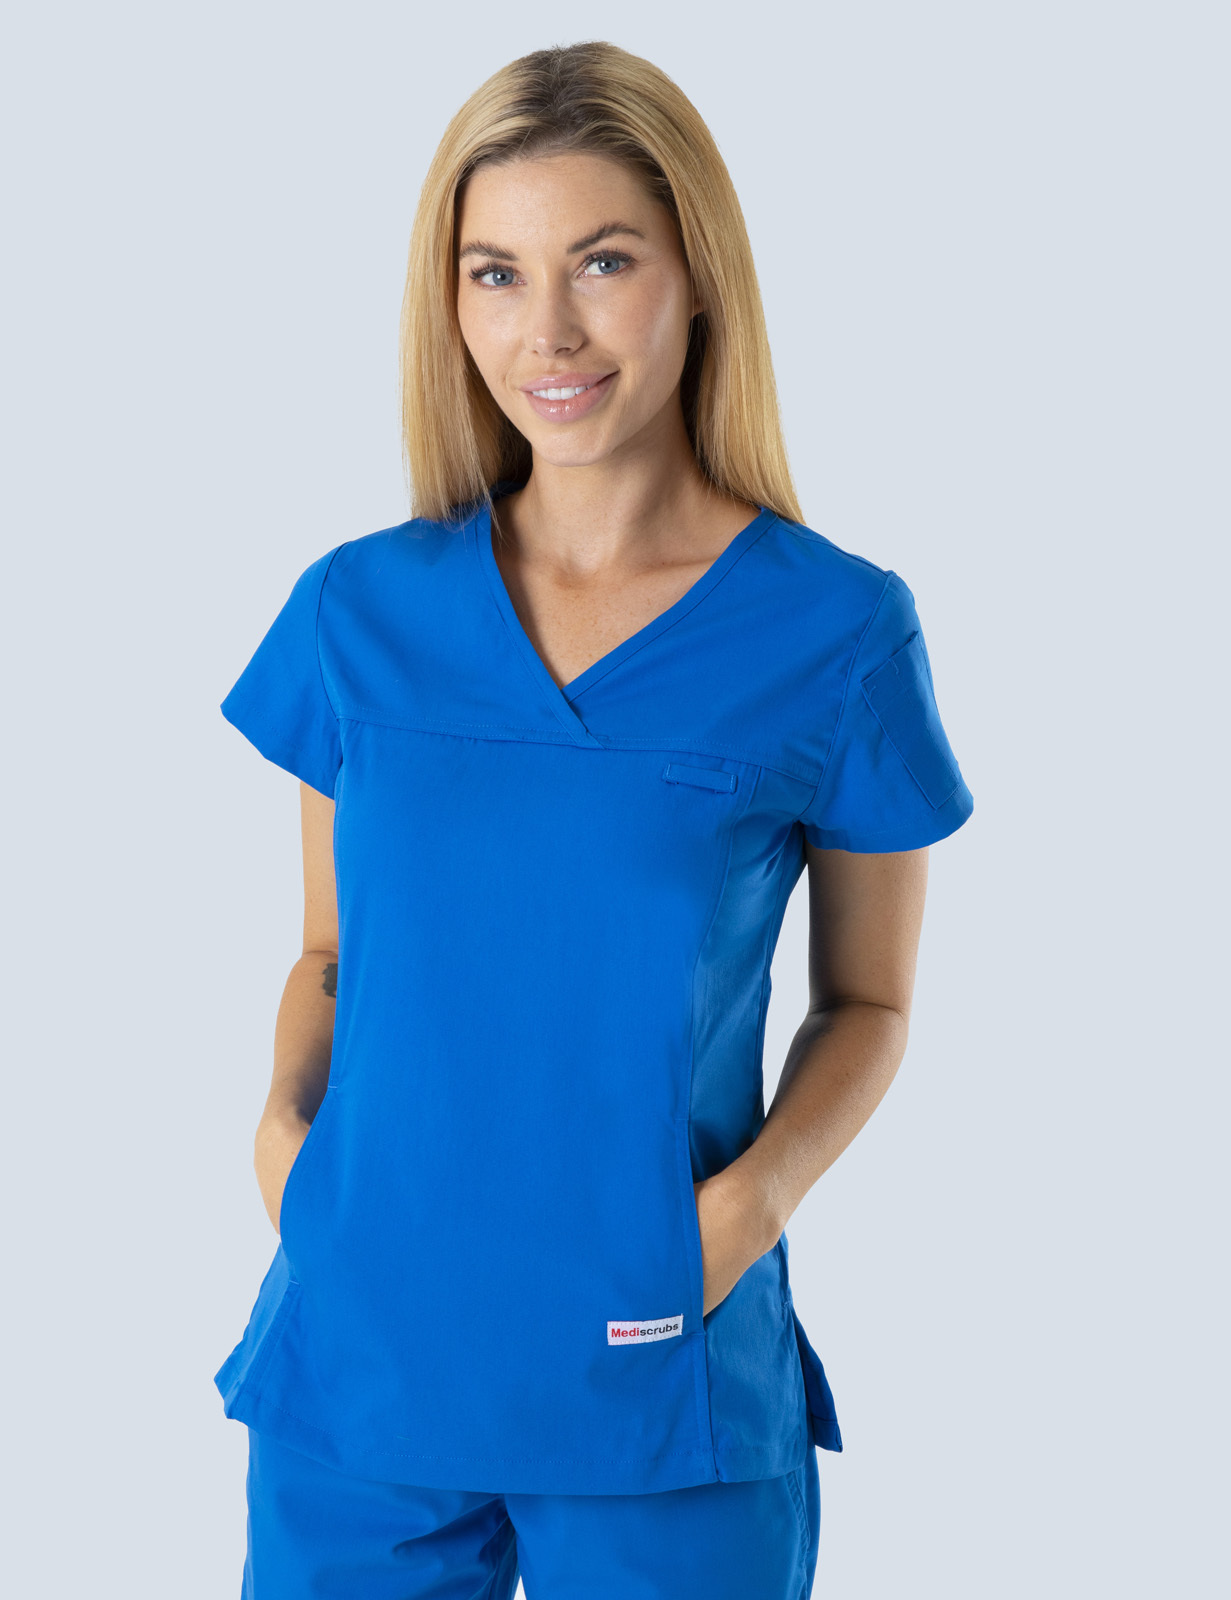 Women's Fit Solid Scrub Top - Royal - XX Small